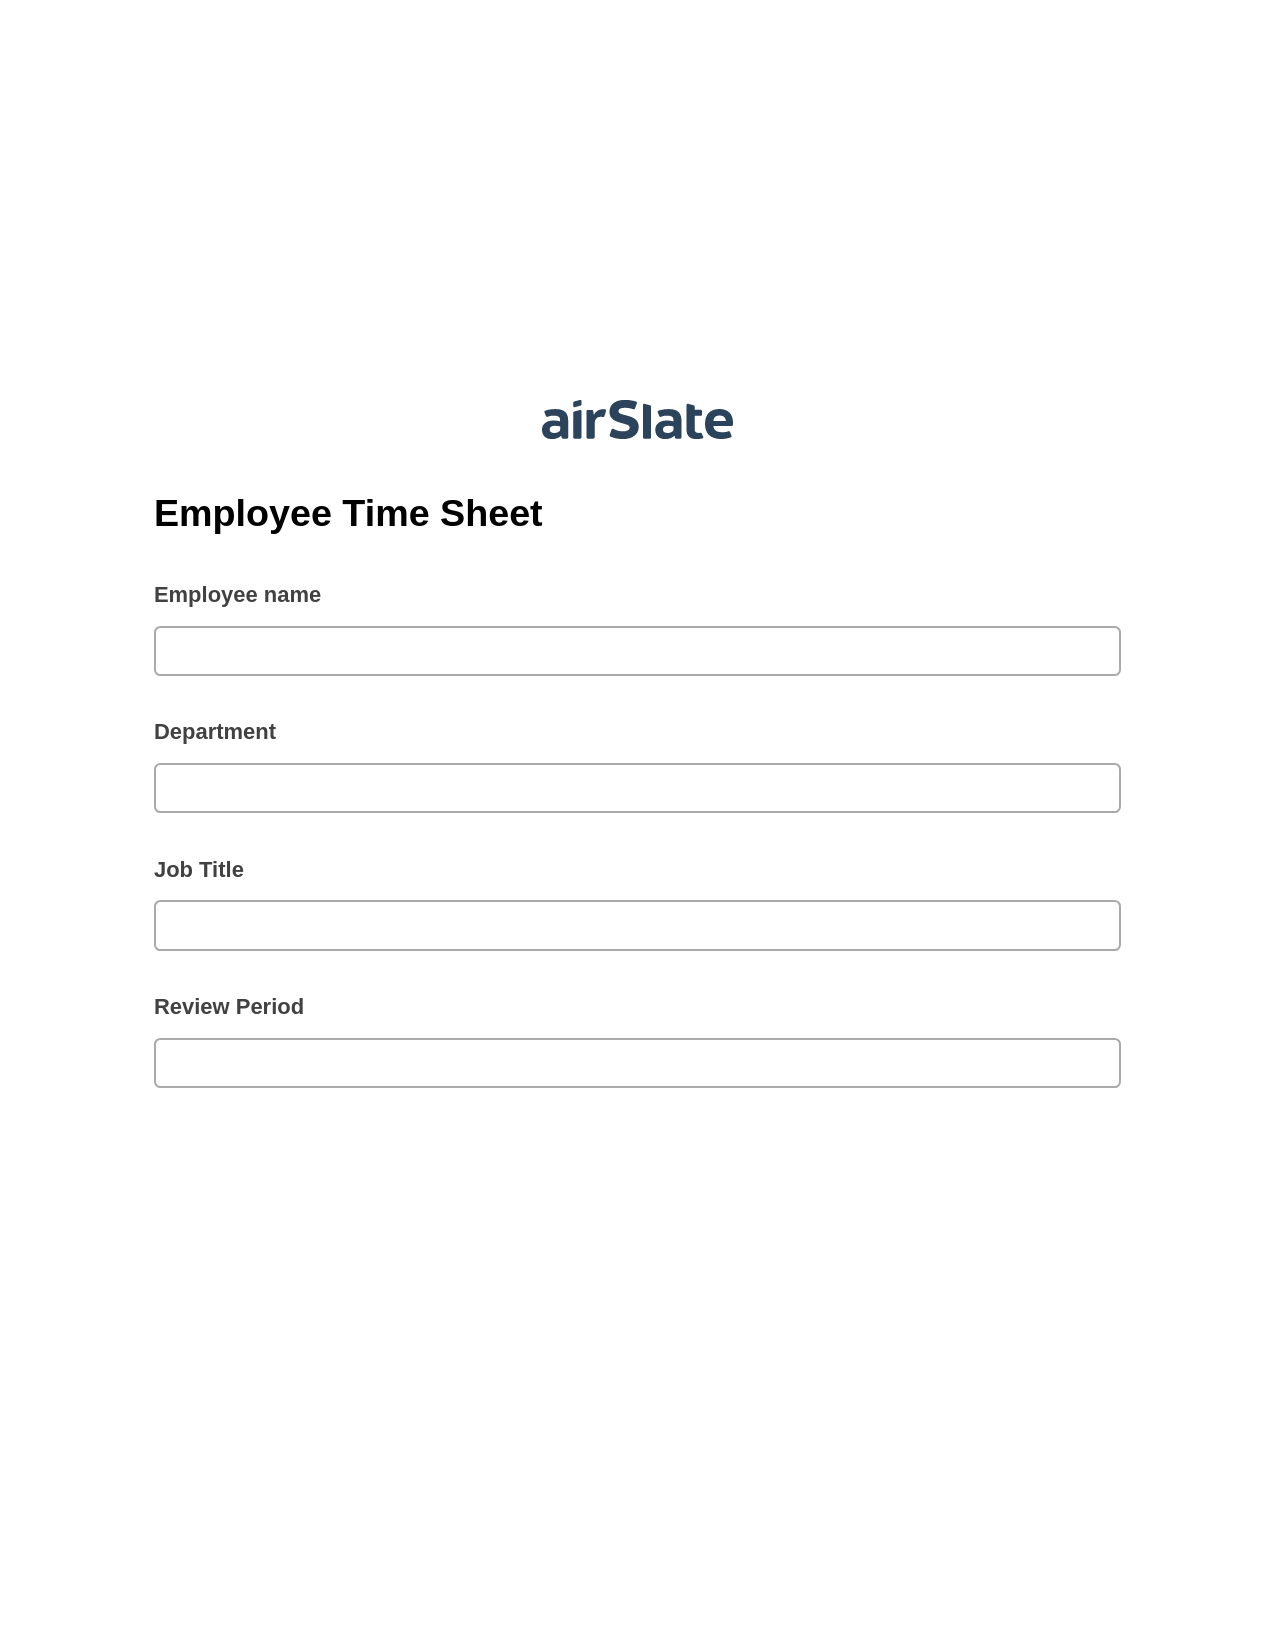 Employee Time Sheet Pre-fill from another Slate Bot, Create slate addon, Archive to Box Bot